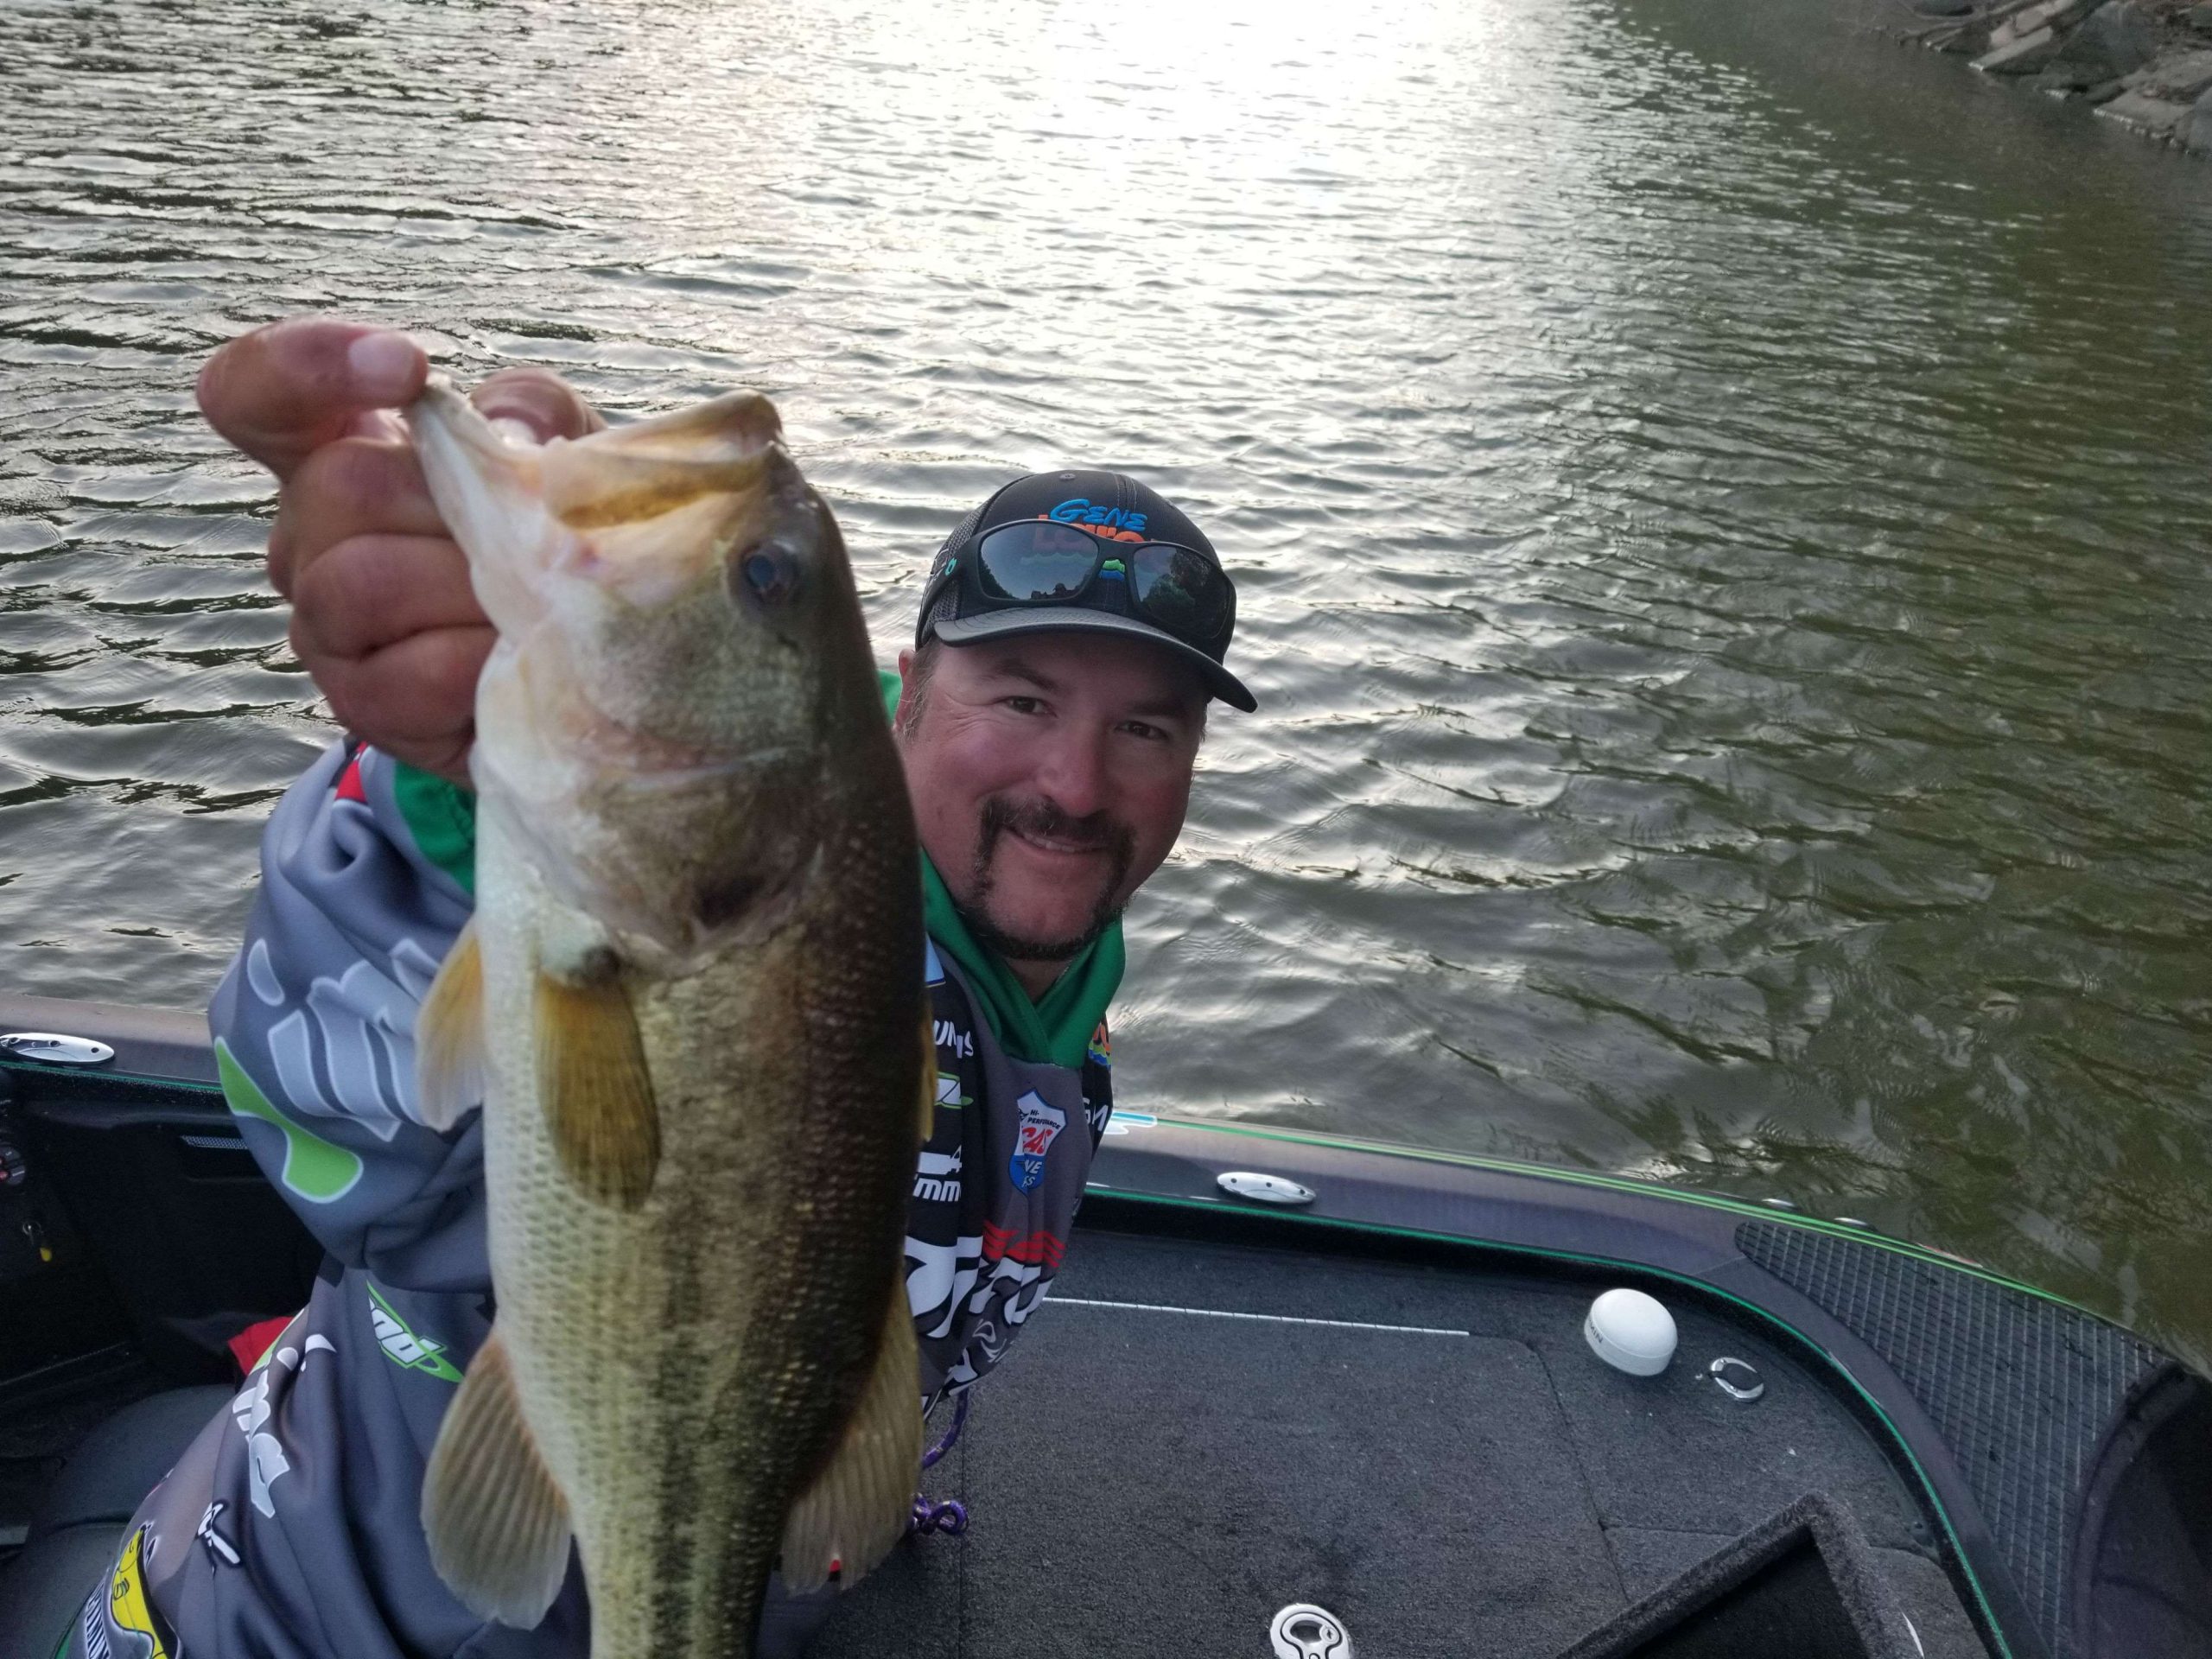 Roumbanis is on the board.  Nice 2 1/2 pounder to start the day.  